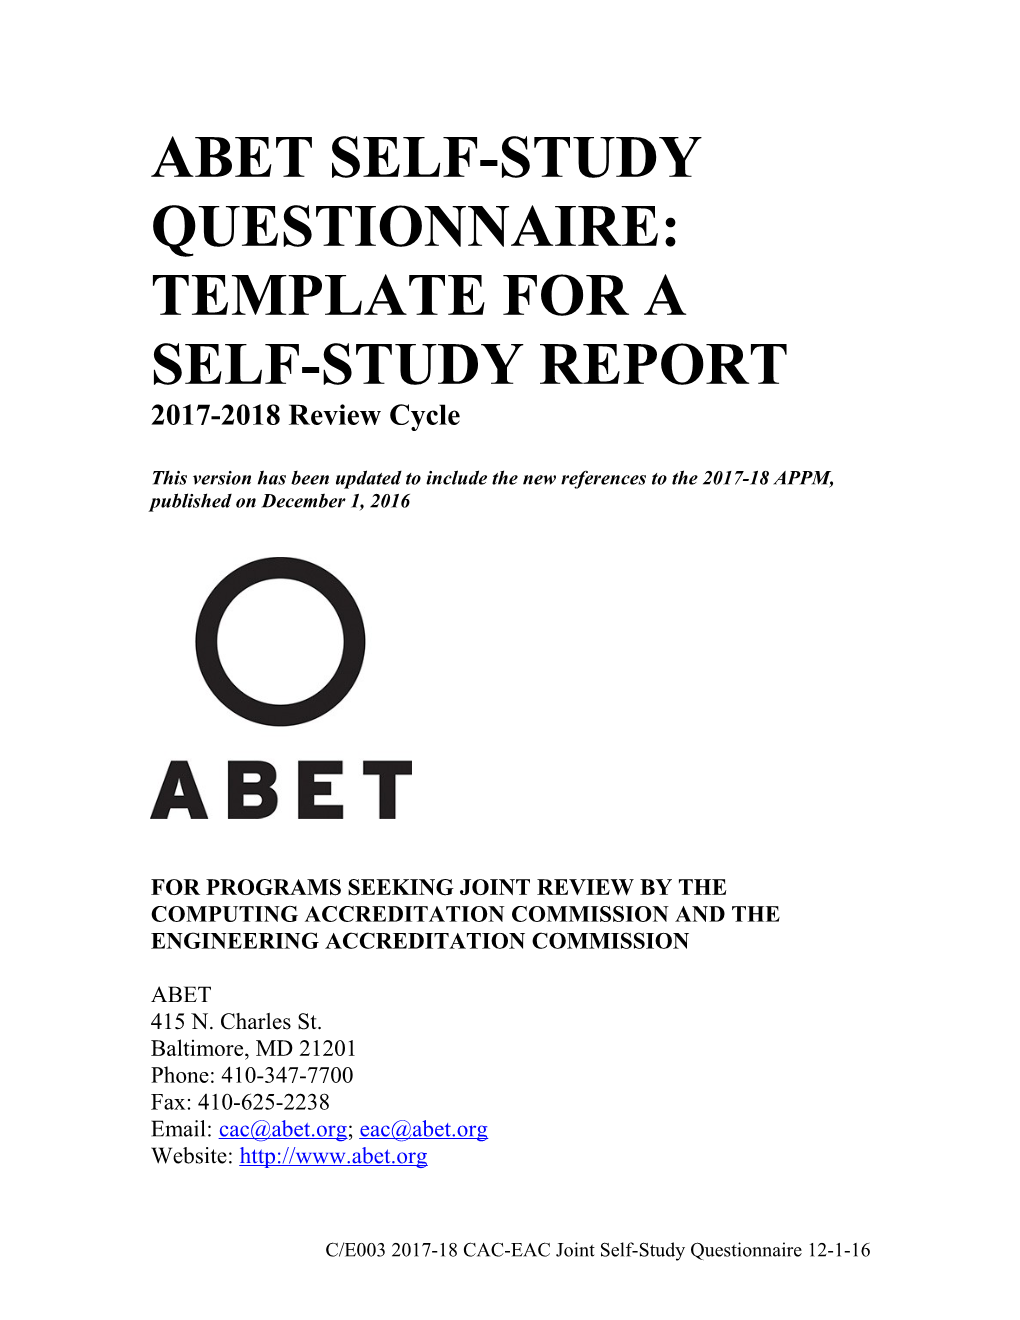 Template for a Self-Study Report